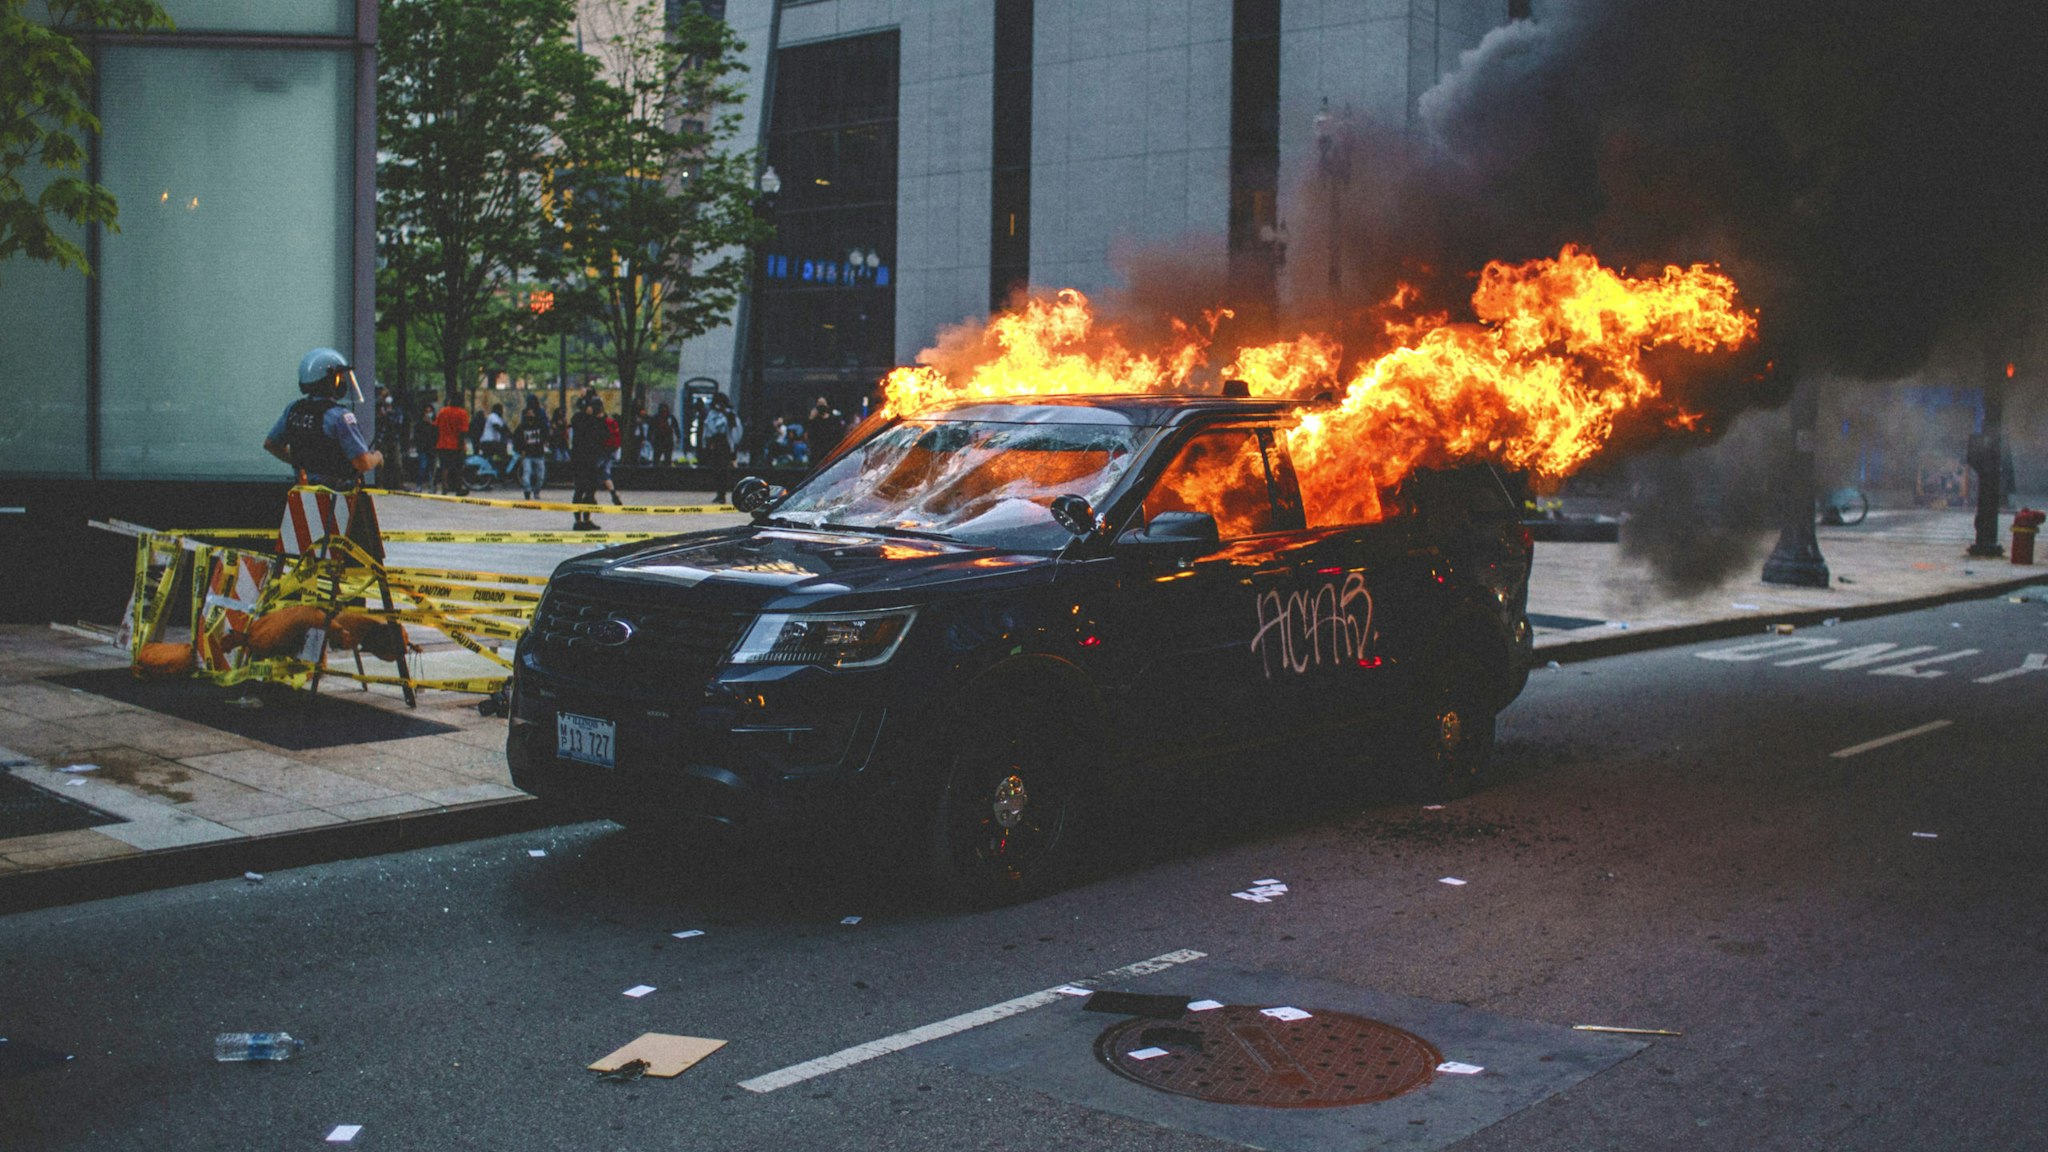 Protesters set fire to a police vehicle , on May 30, 2020 during a protest against the death of George Floyd, an unarmed black man who died while while being arrested and pinned to the ground by the knee of a Minneapolis police officer.